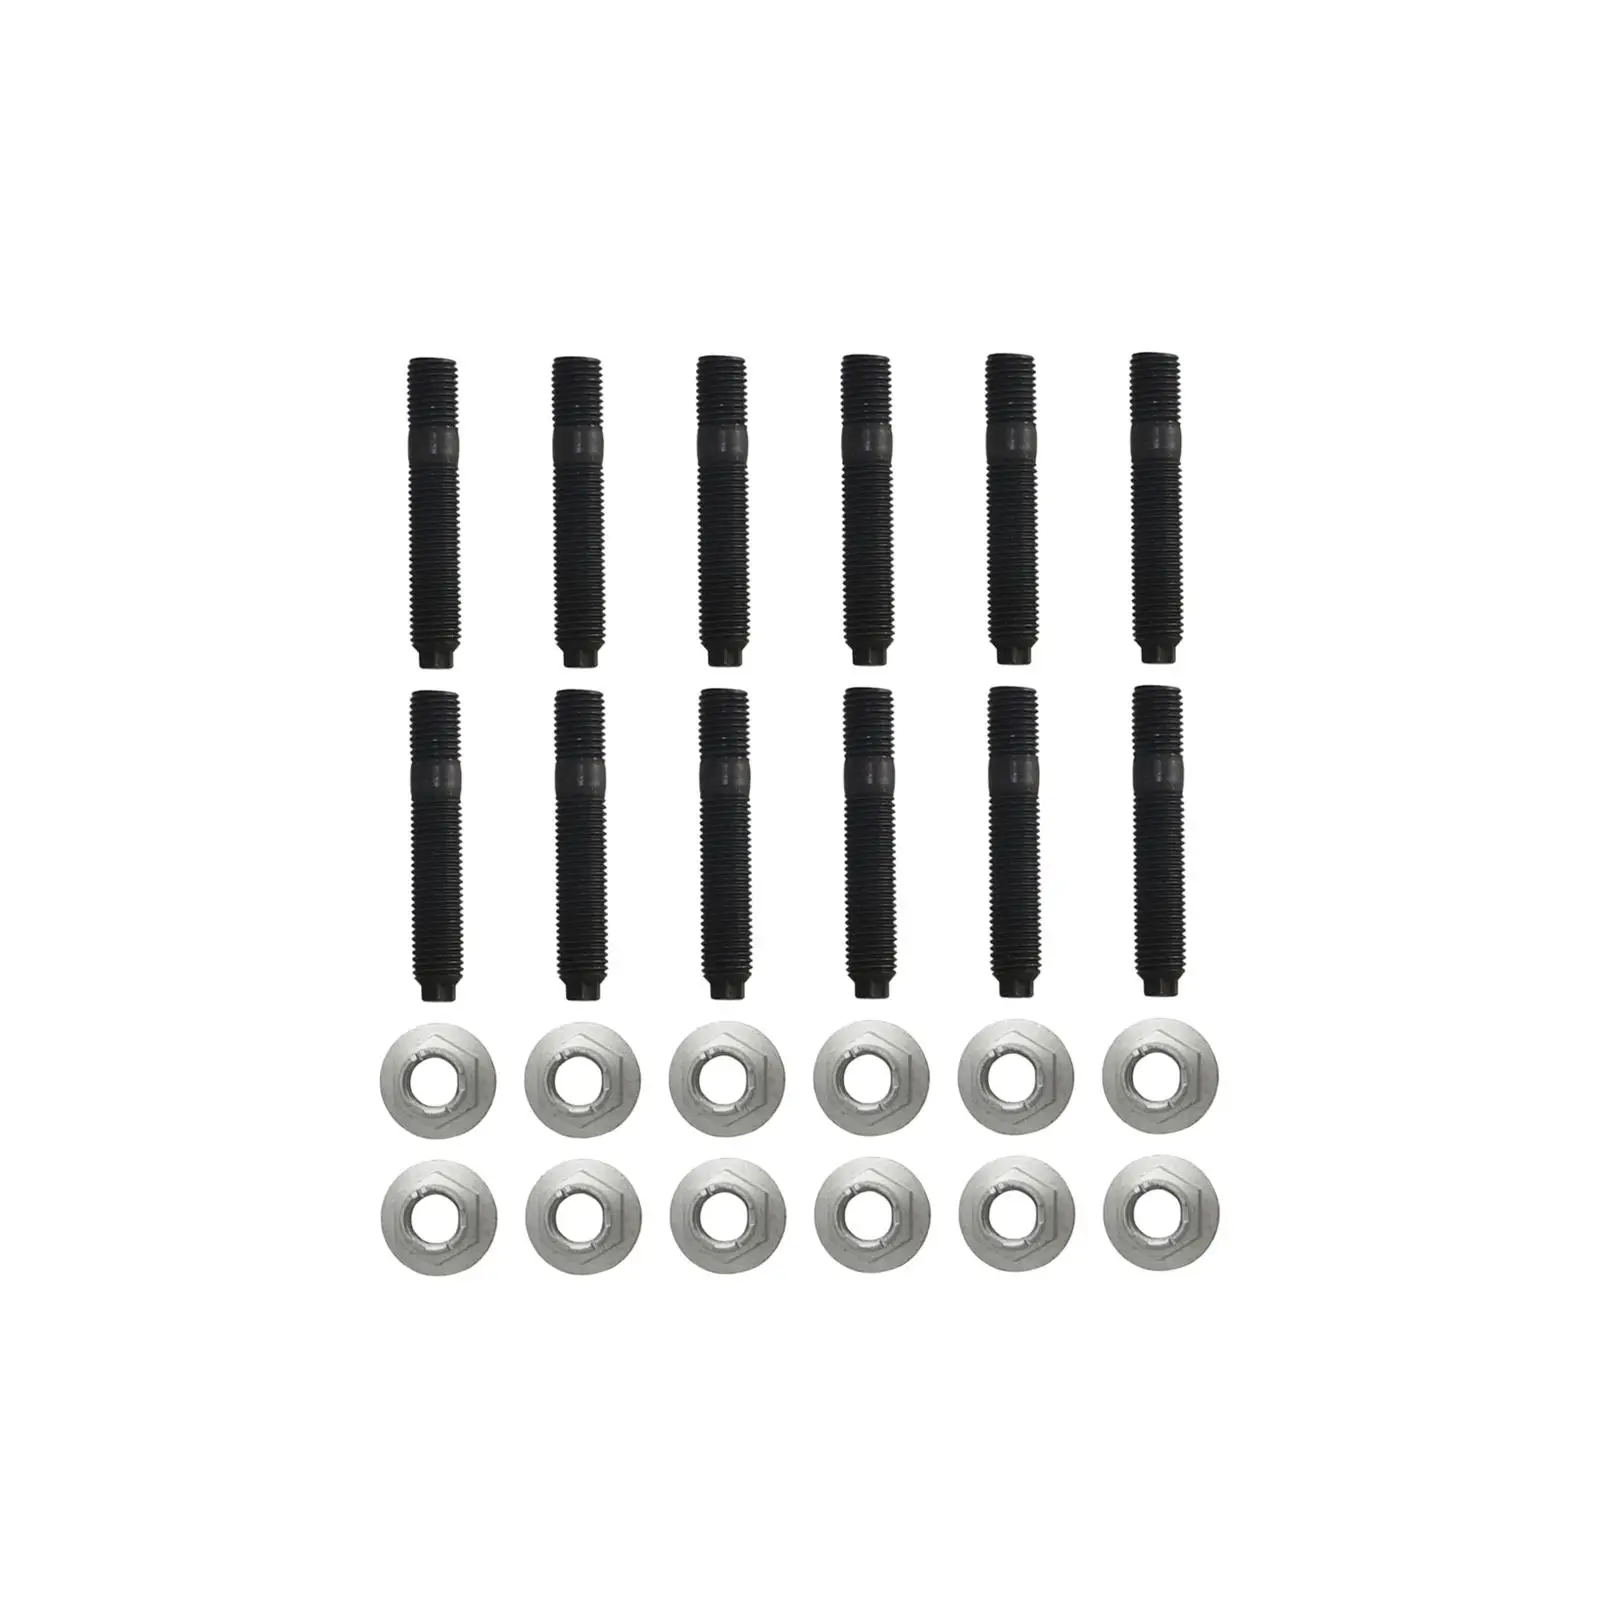 Exhaust Tube Bolts and Nuts Exhaust Stud Kit for Toyota 4.2L Automotive